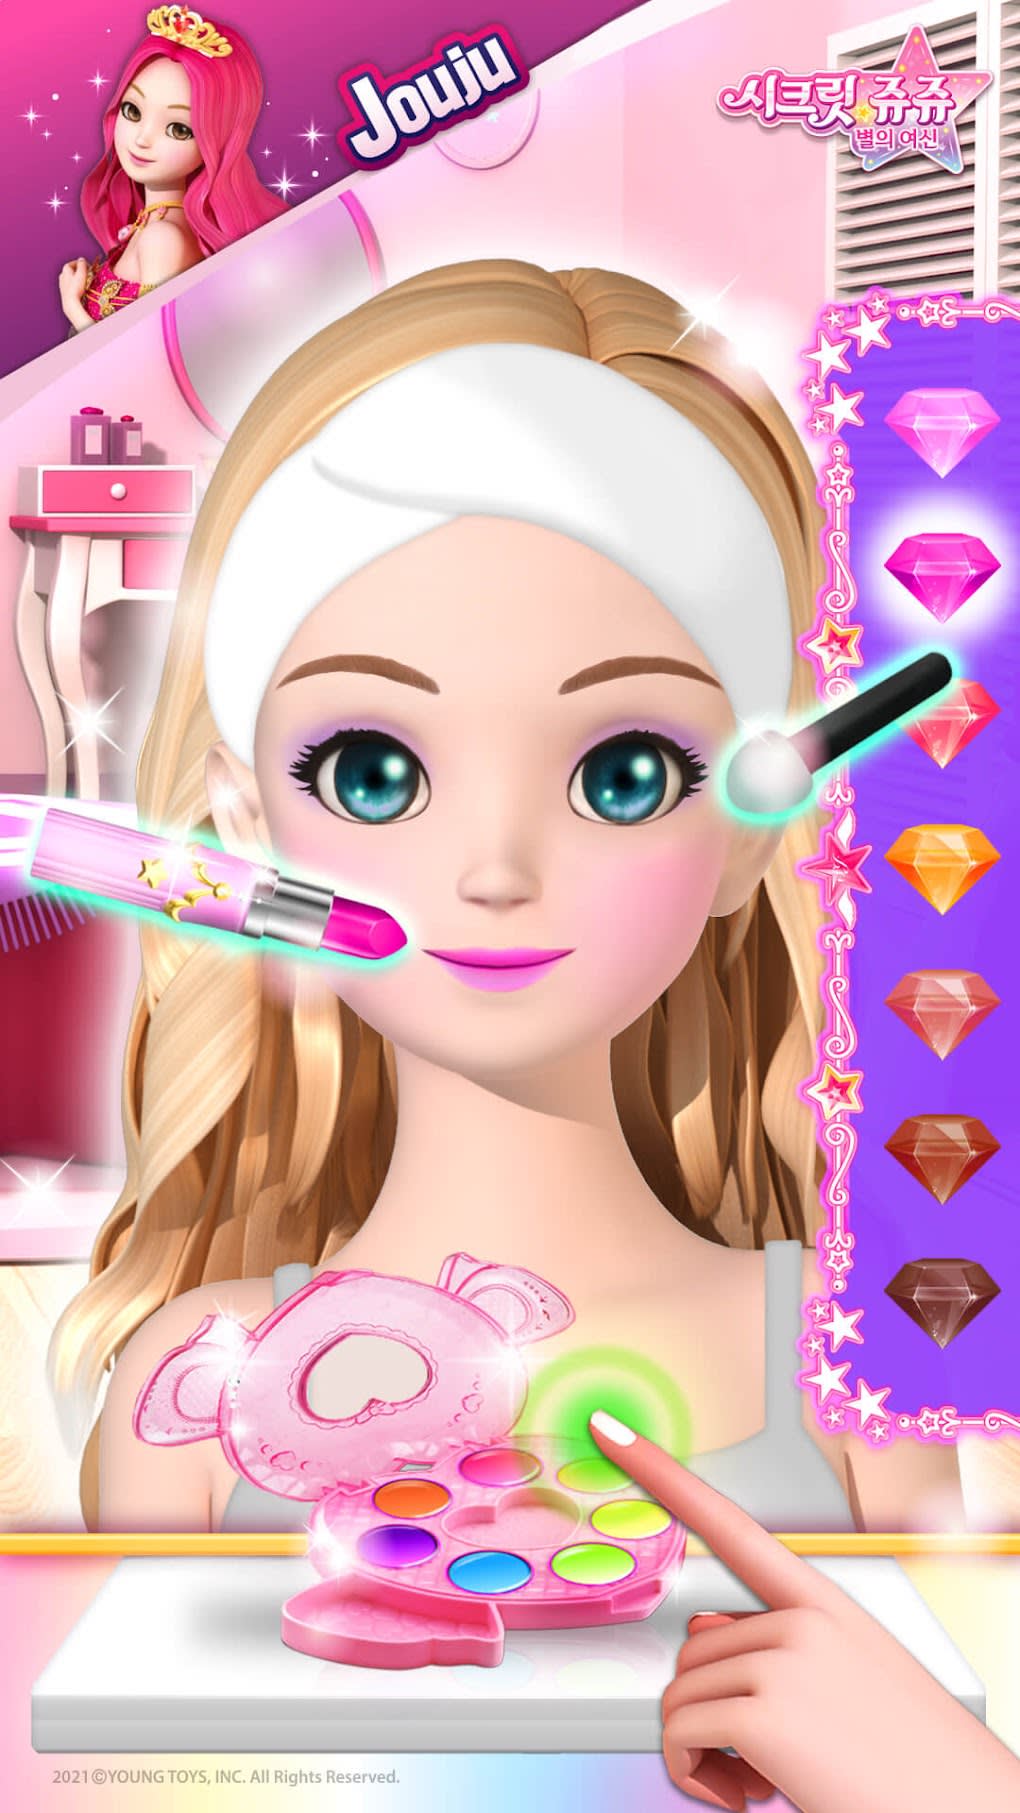 Princess Makeup And Dress Up Game 2021::Appstore for Android